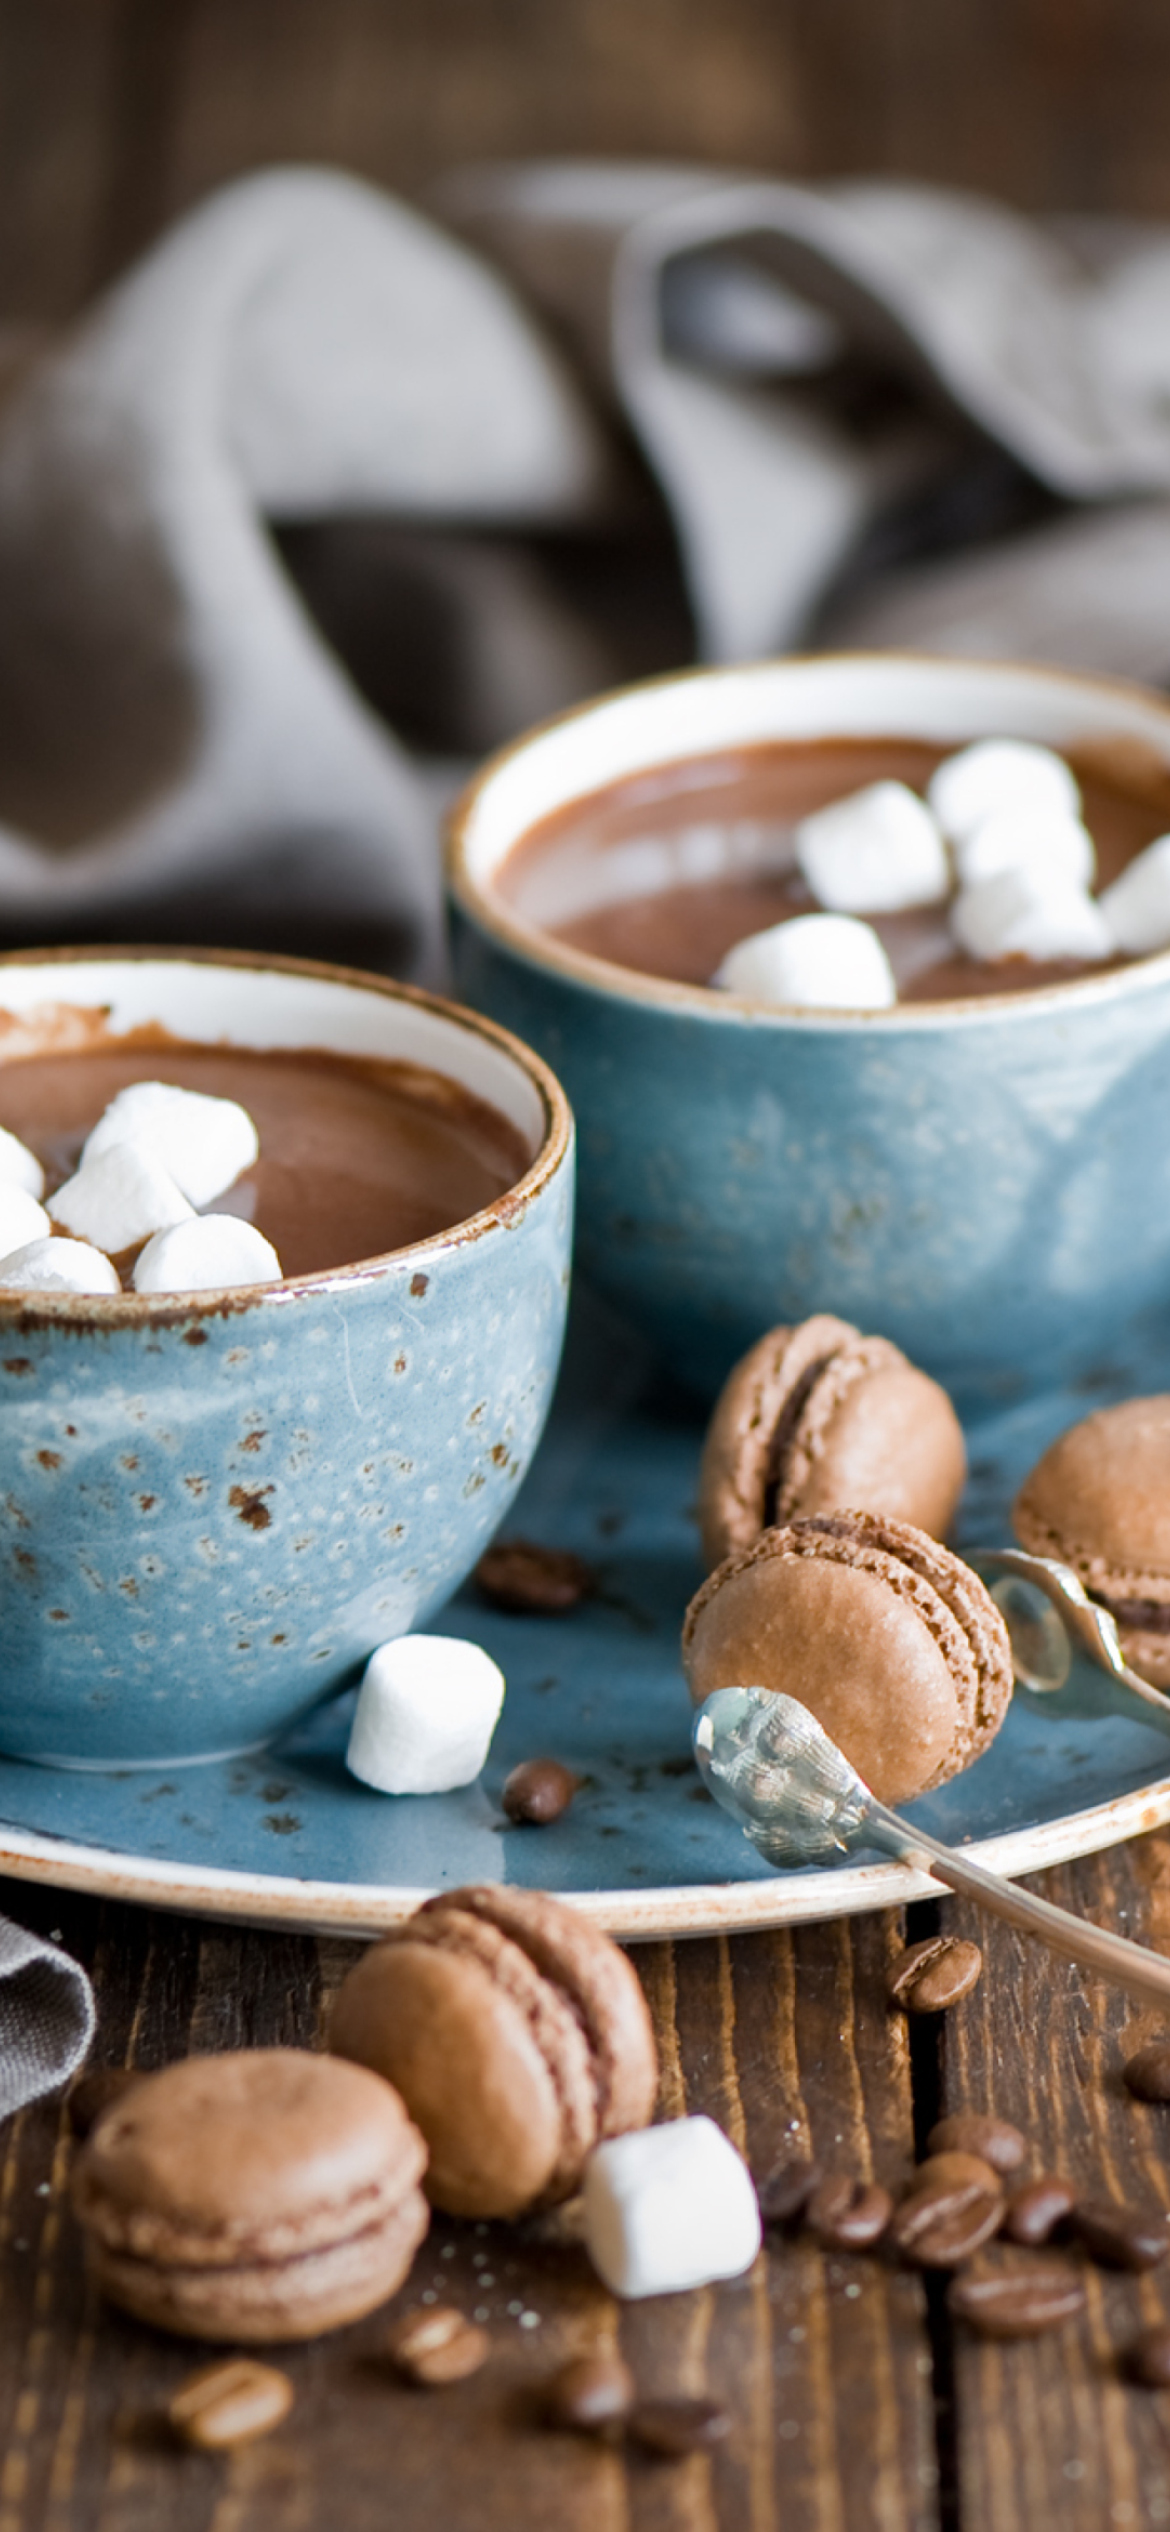 Hot Chocolate With Marshmallows And Macarons wallpaper 1170x2532